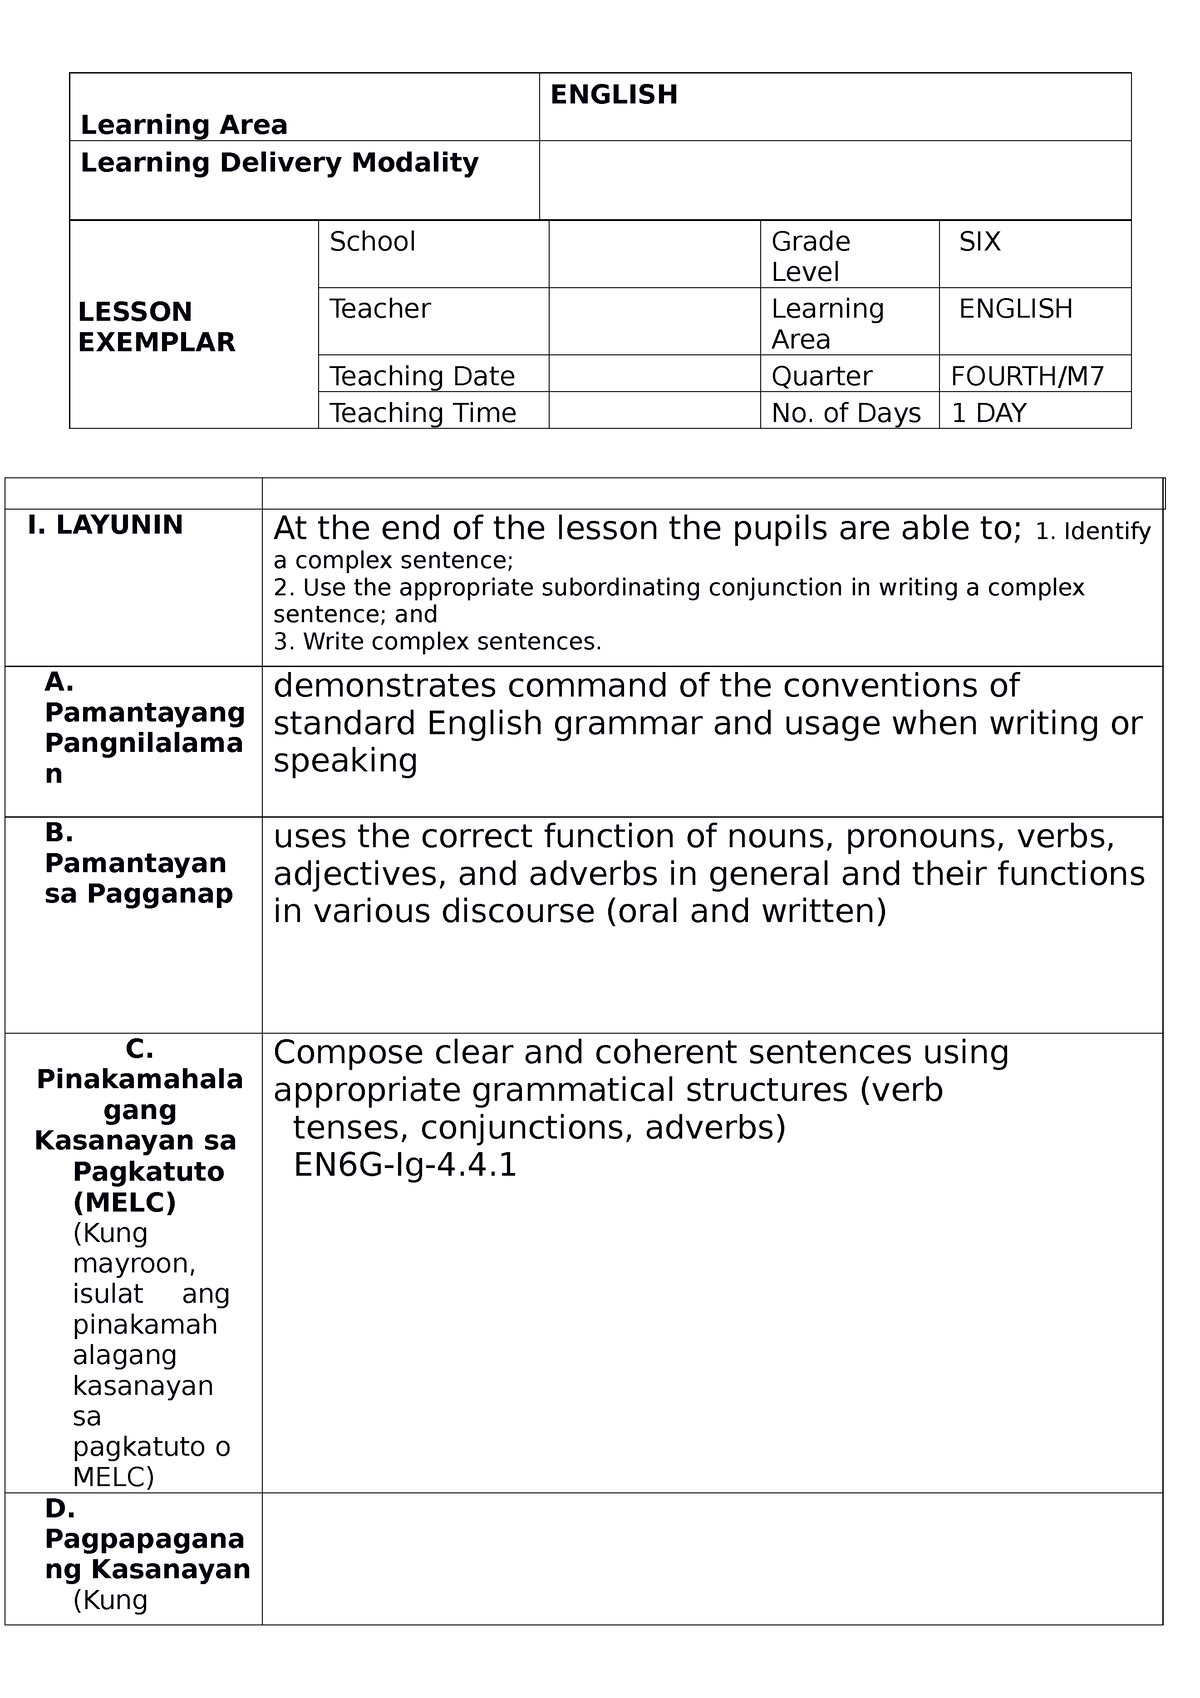 cot-q4-eng-6-compose-clear-and-coherent-sentences-using-appropriate